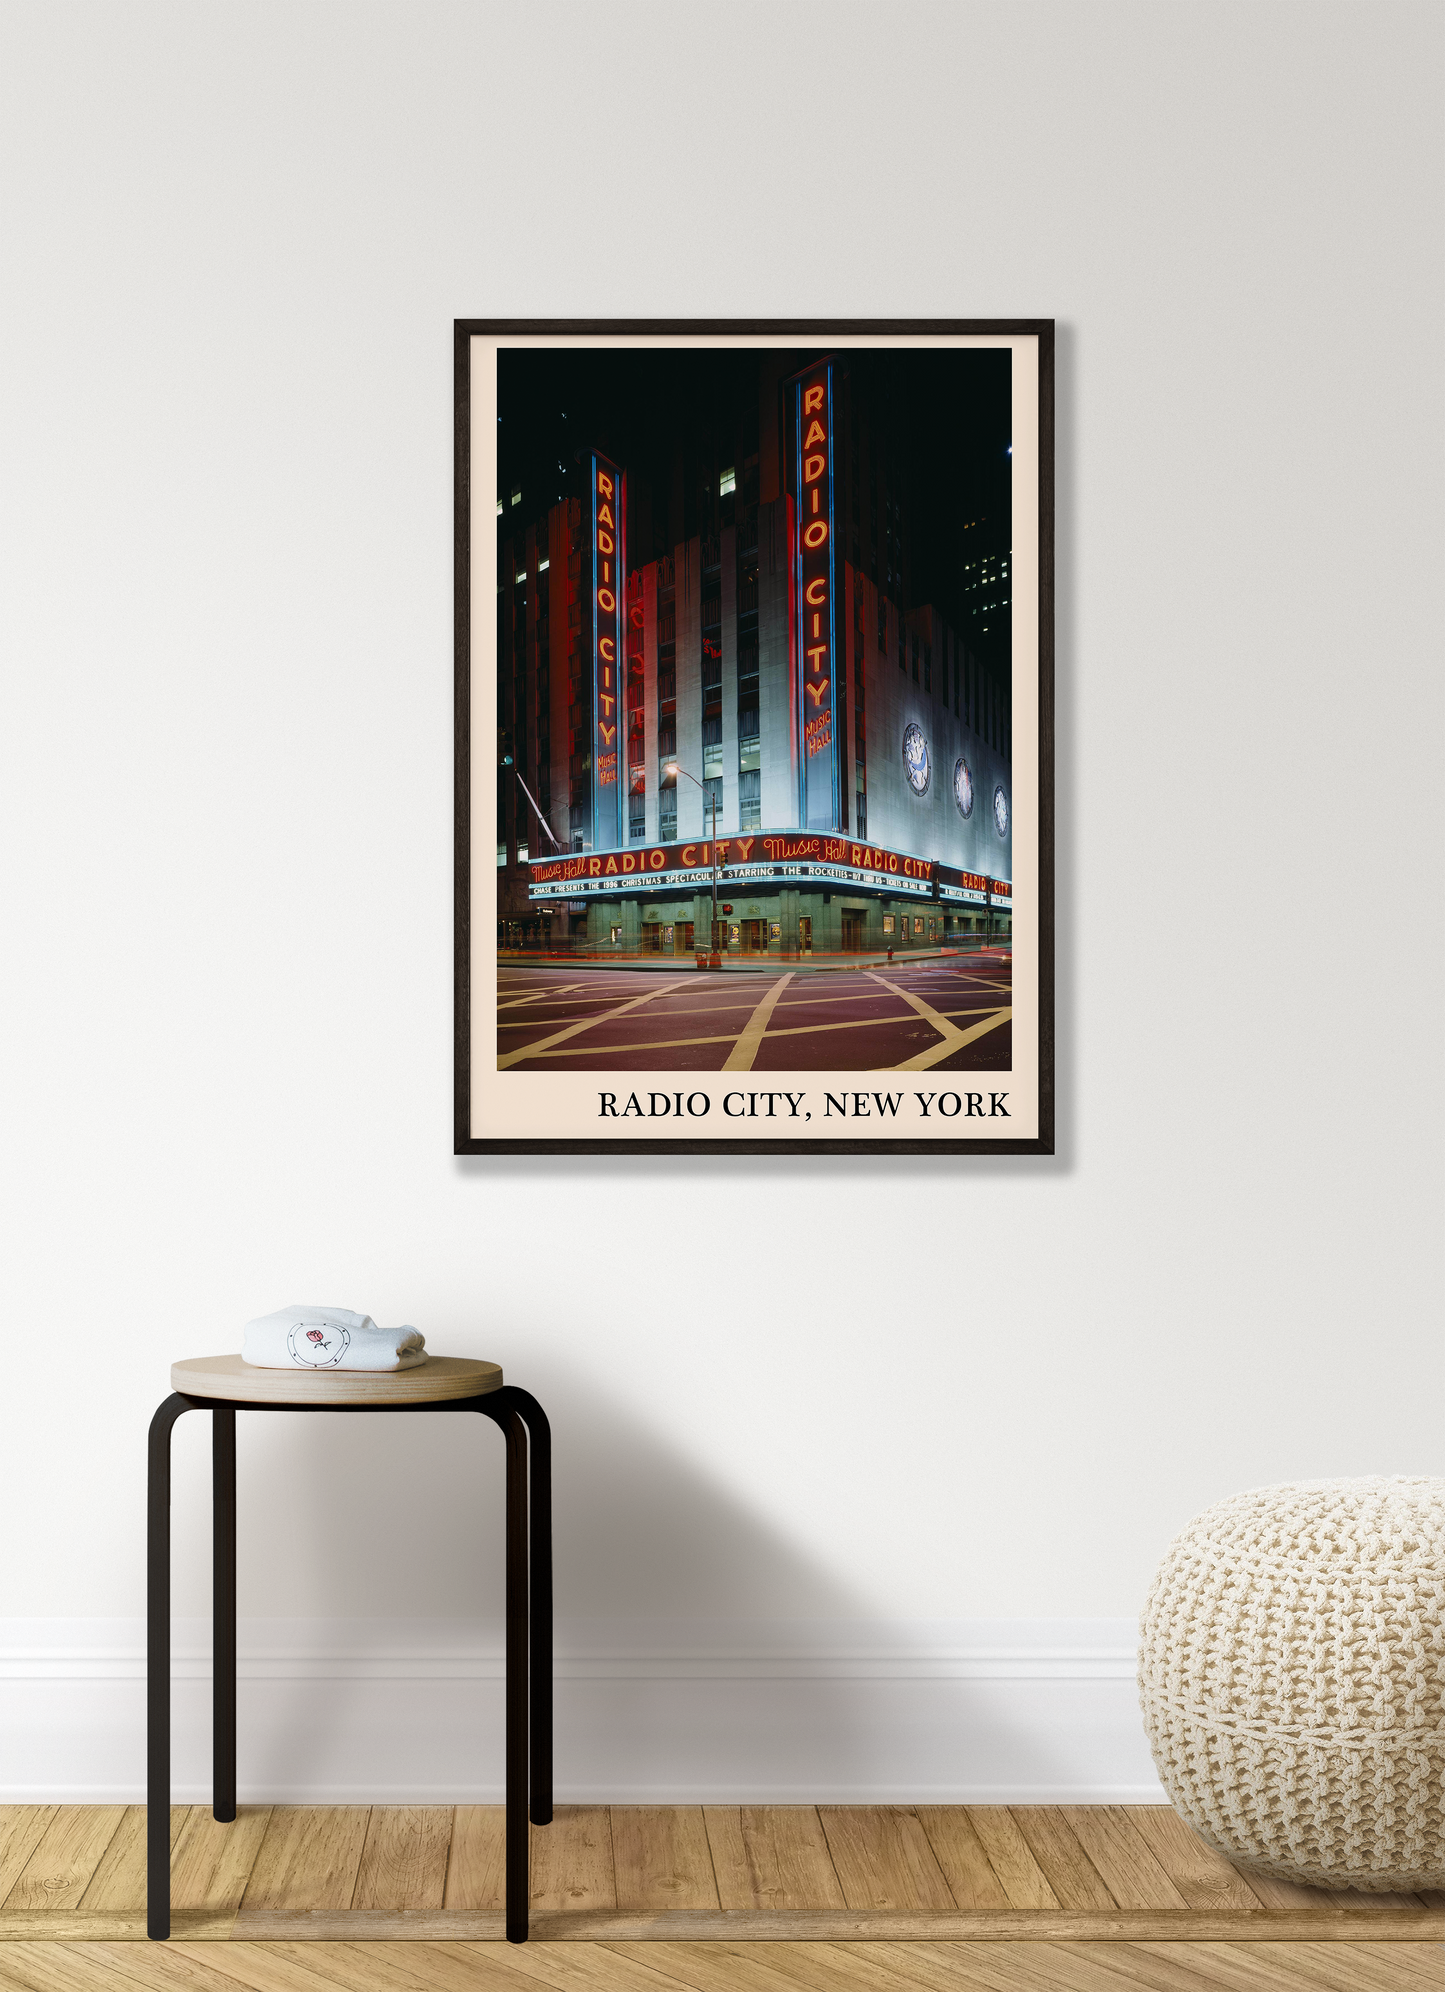 Iconic photo of Radio City in New York captured in a retro black framed jazz venue poster, hanging on a white living room wall